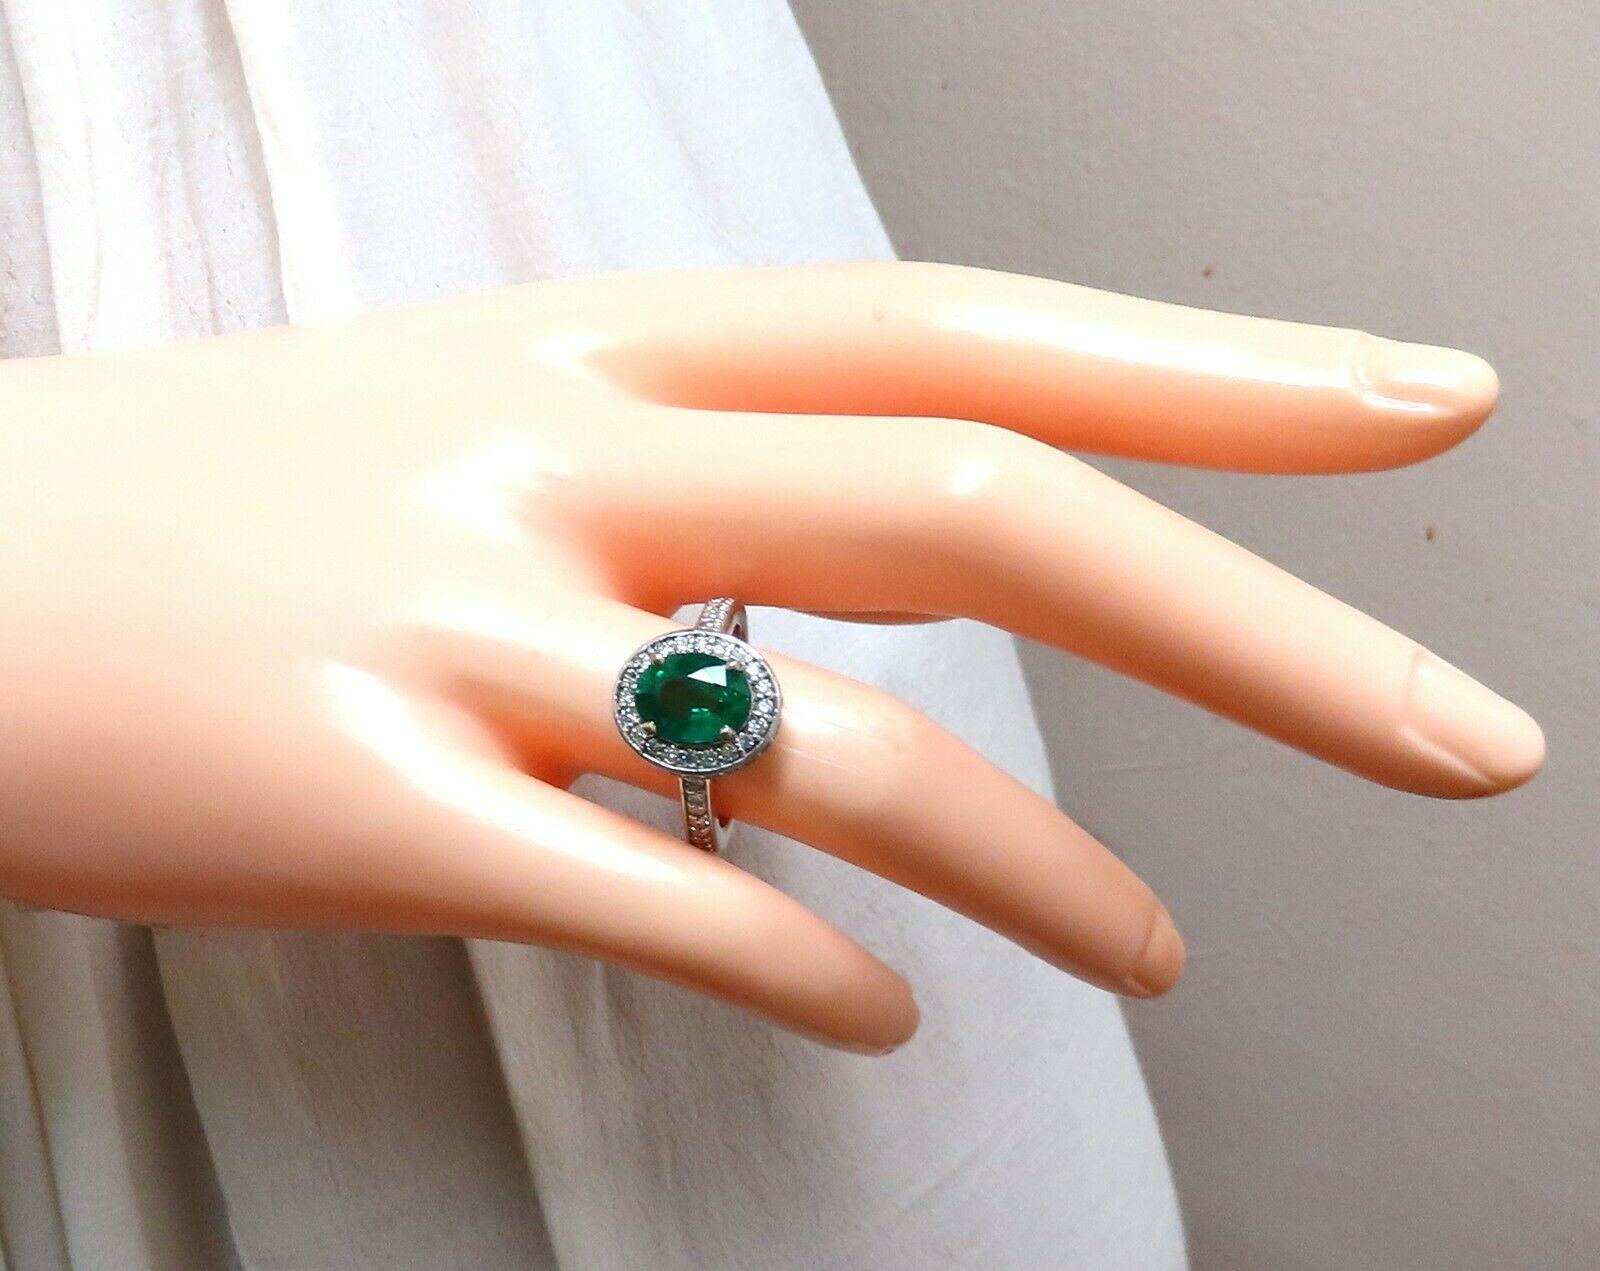 Halo Mod Deco Green.

2.03ct. Natural Oval cut, Emerald Ring

Emerald: 9.5 x 7.3mm 

Transparent & Vivid Green 

1.05ct. Diamonds.

Round & full cuts 

G-color Vs-2 clarity.  

14kt. white gold

6.2 grams

Ring Current size: 7

Depth of ring: